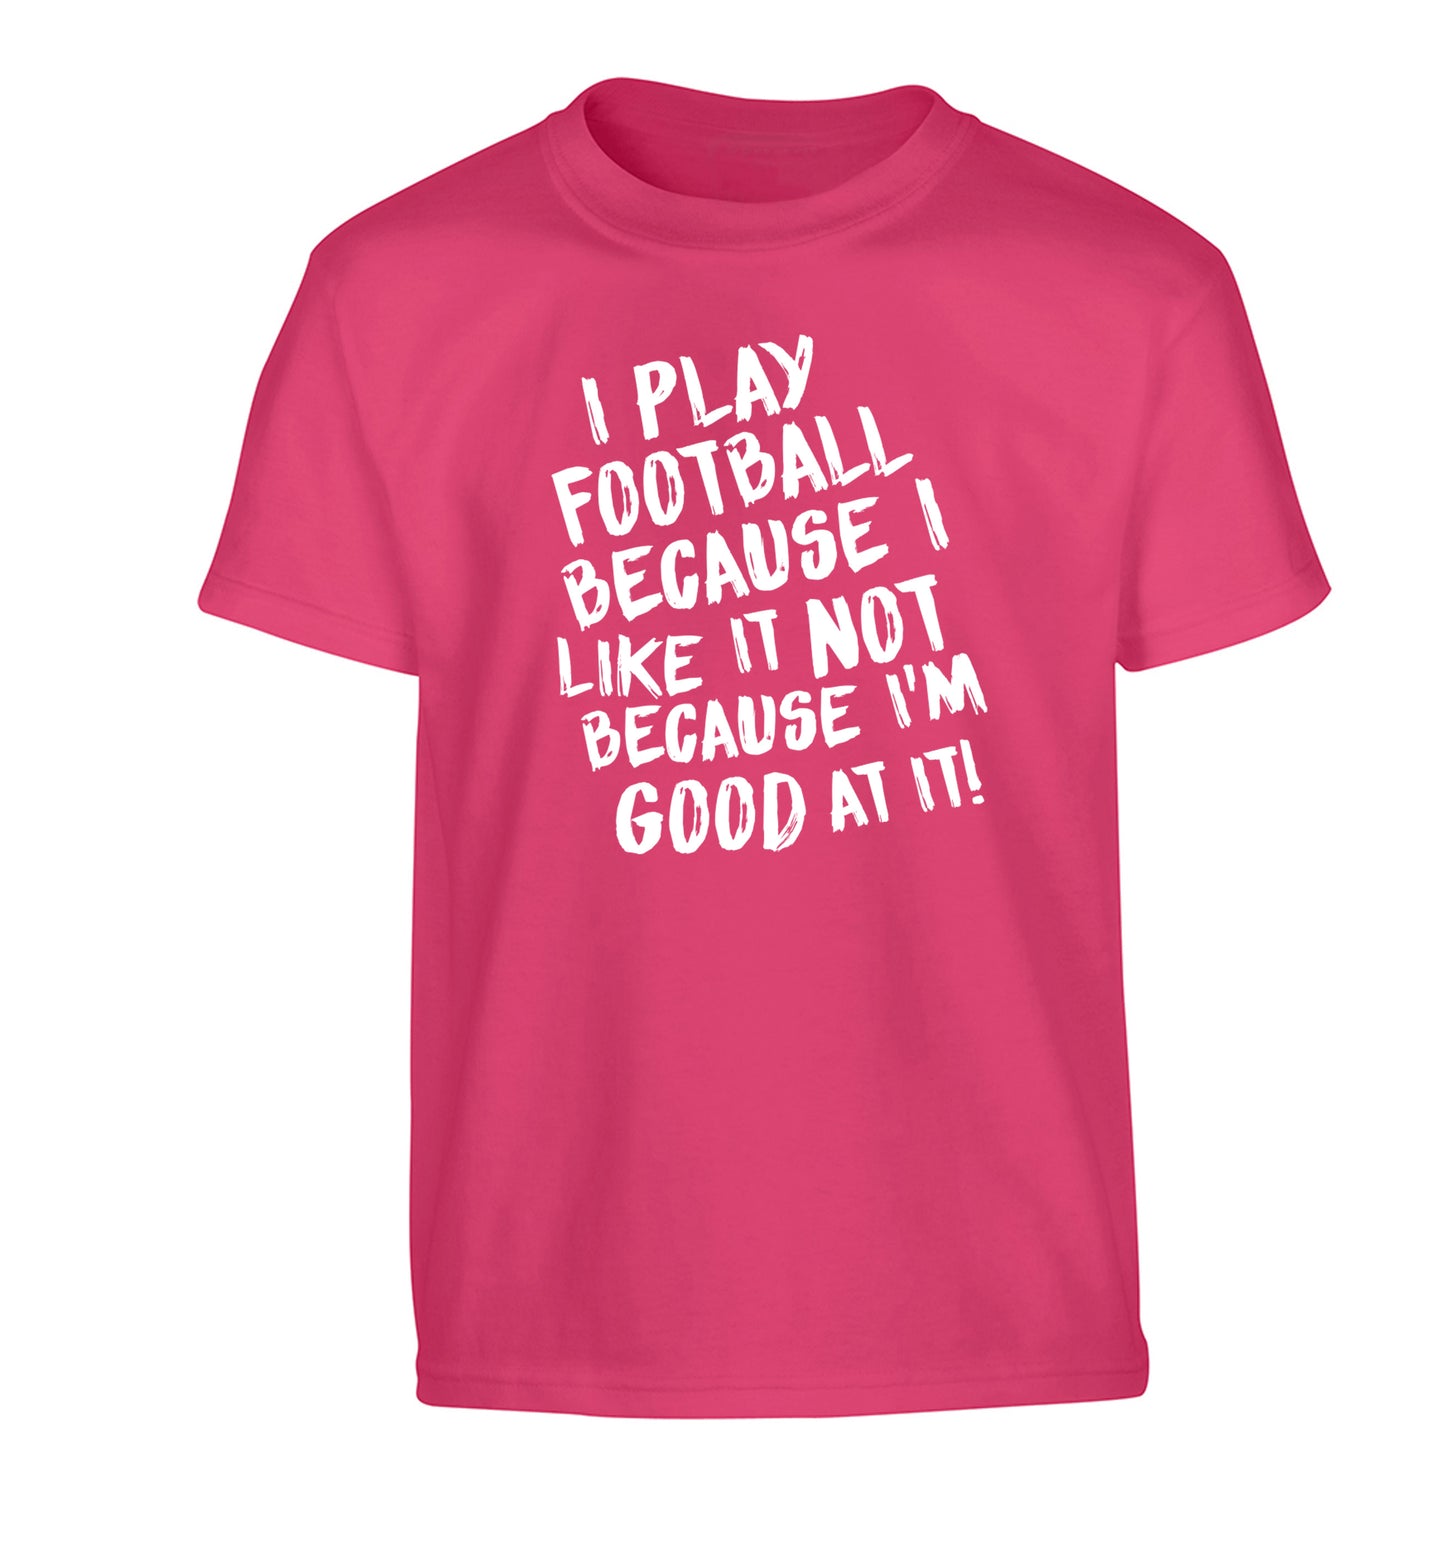 I play football because I like it not because I'm good at it Children's pink Tshirt 12-14 Years